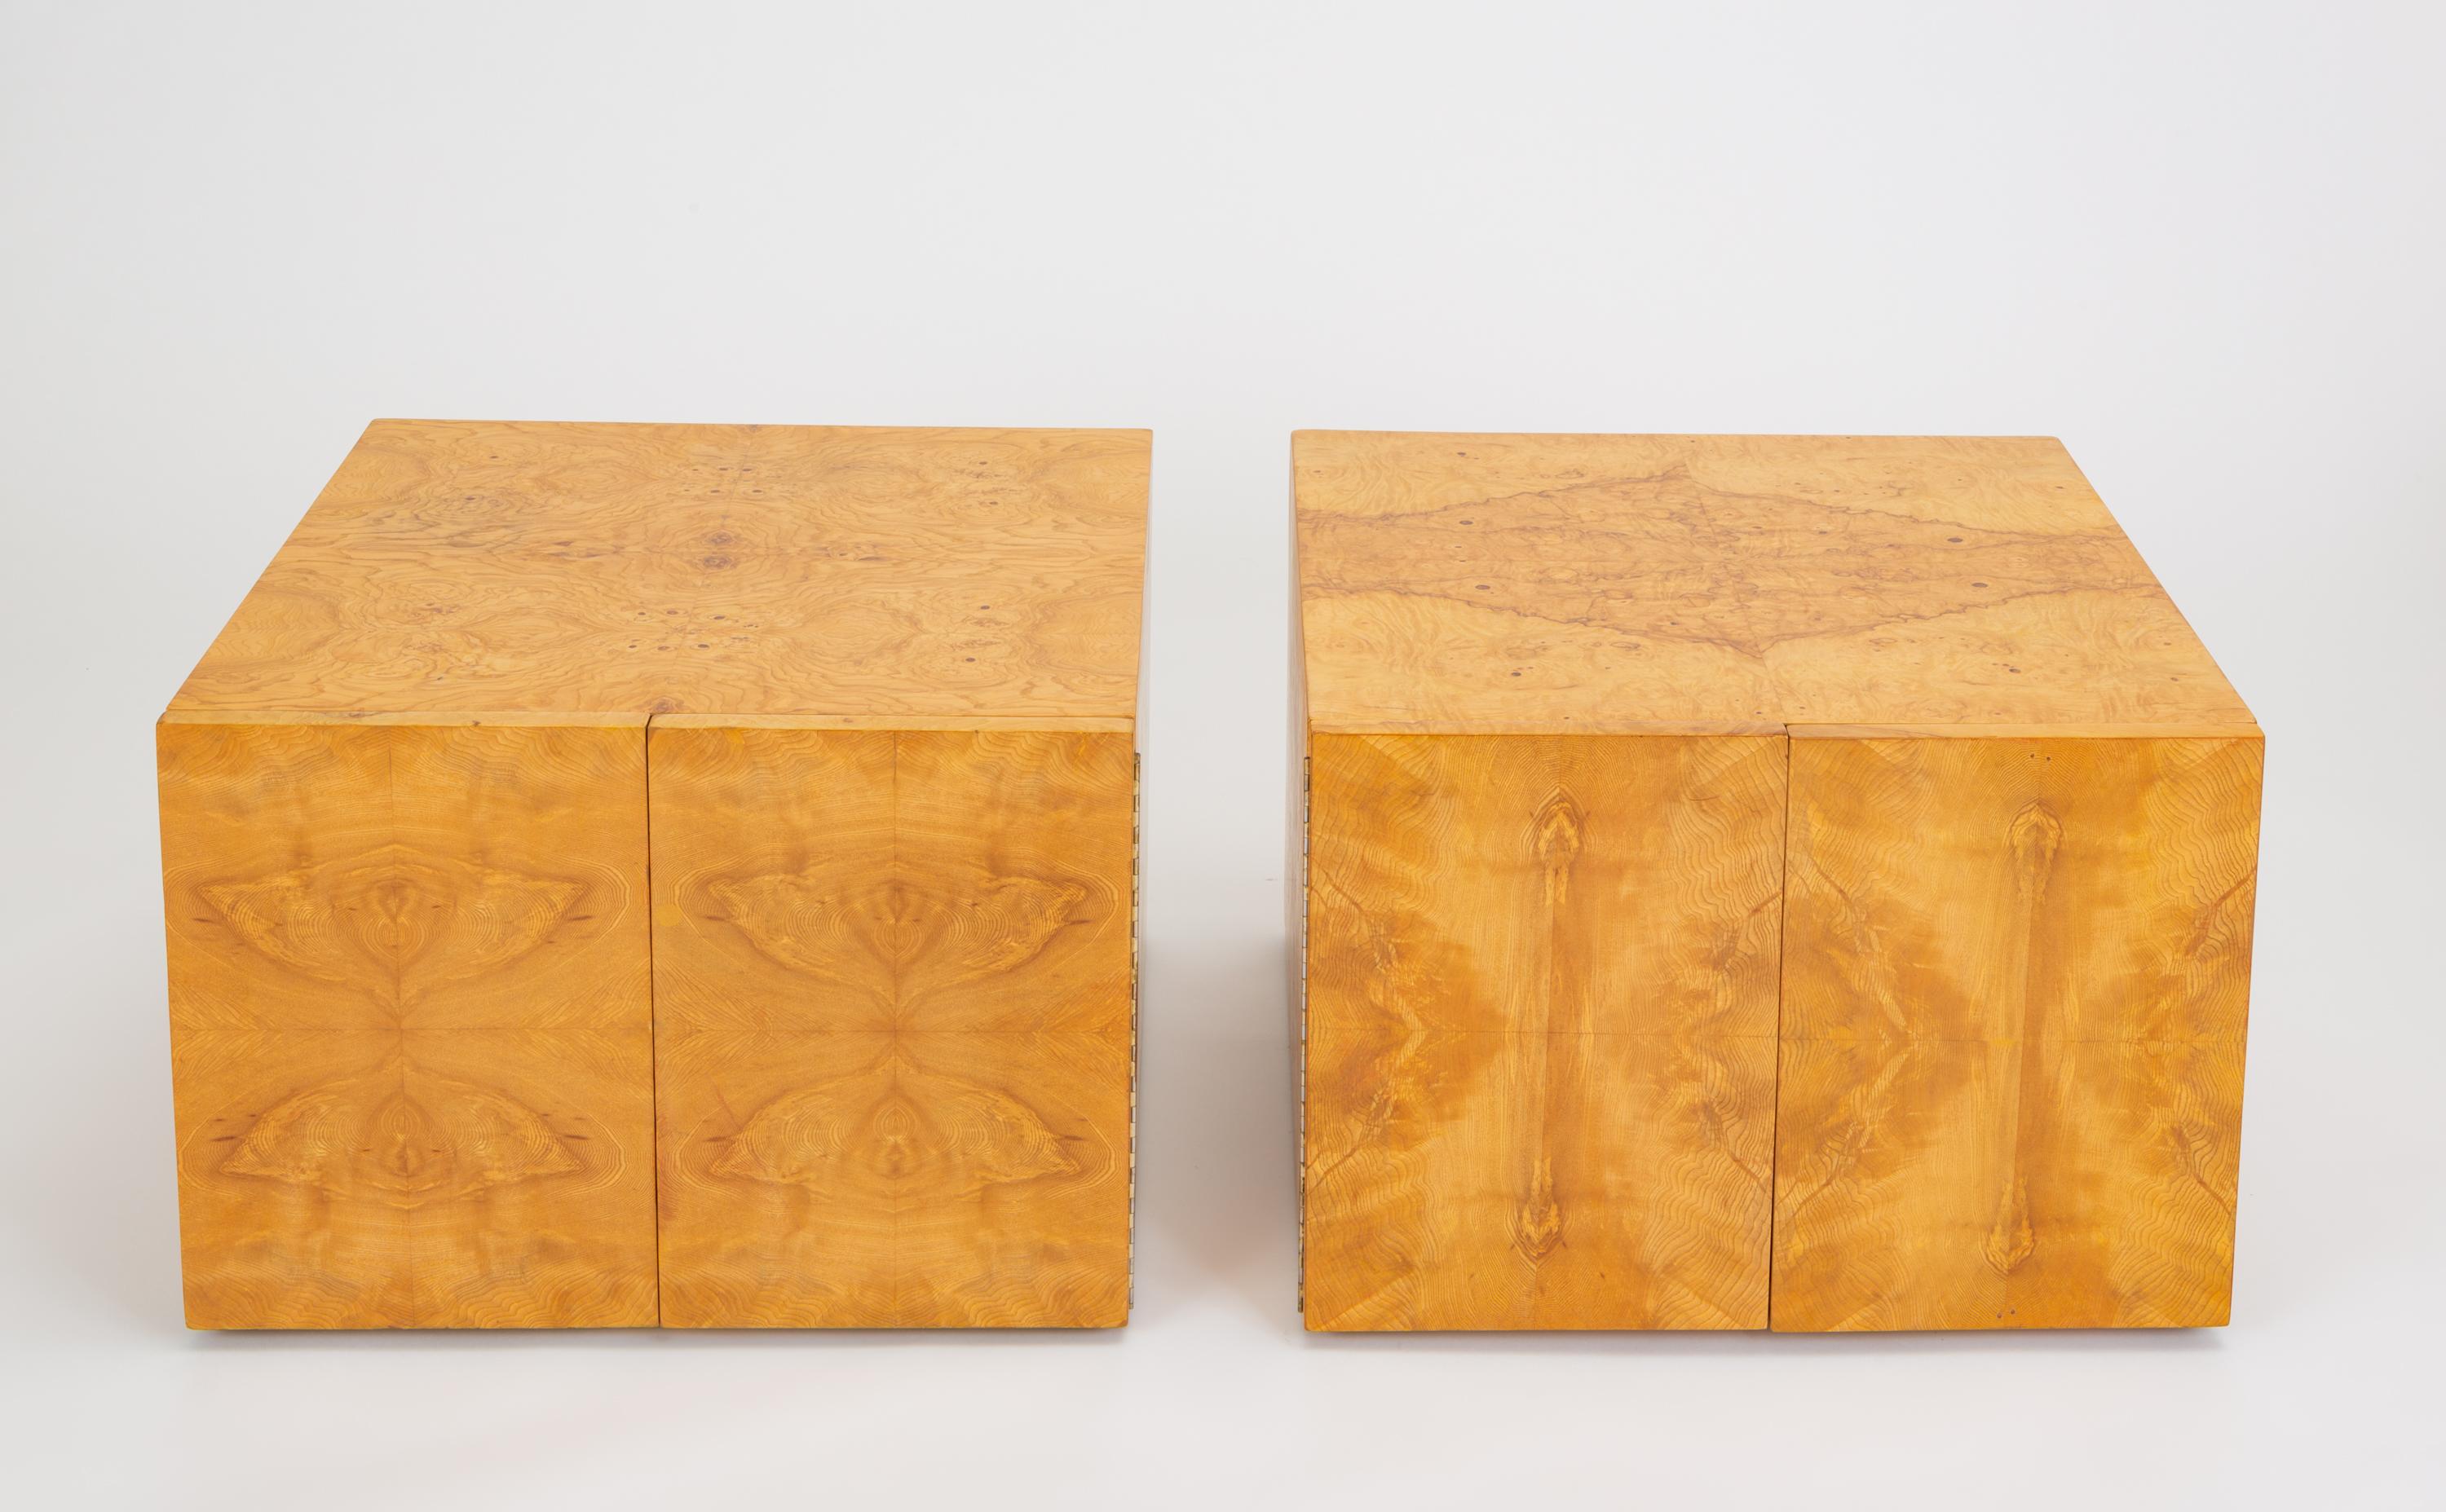 American Pair of Burl Wood Side Tables or Blanket Chests